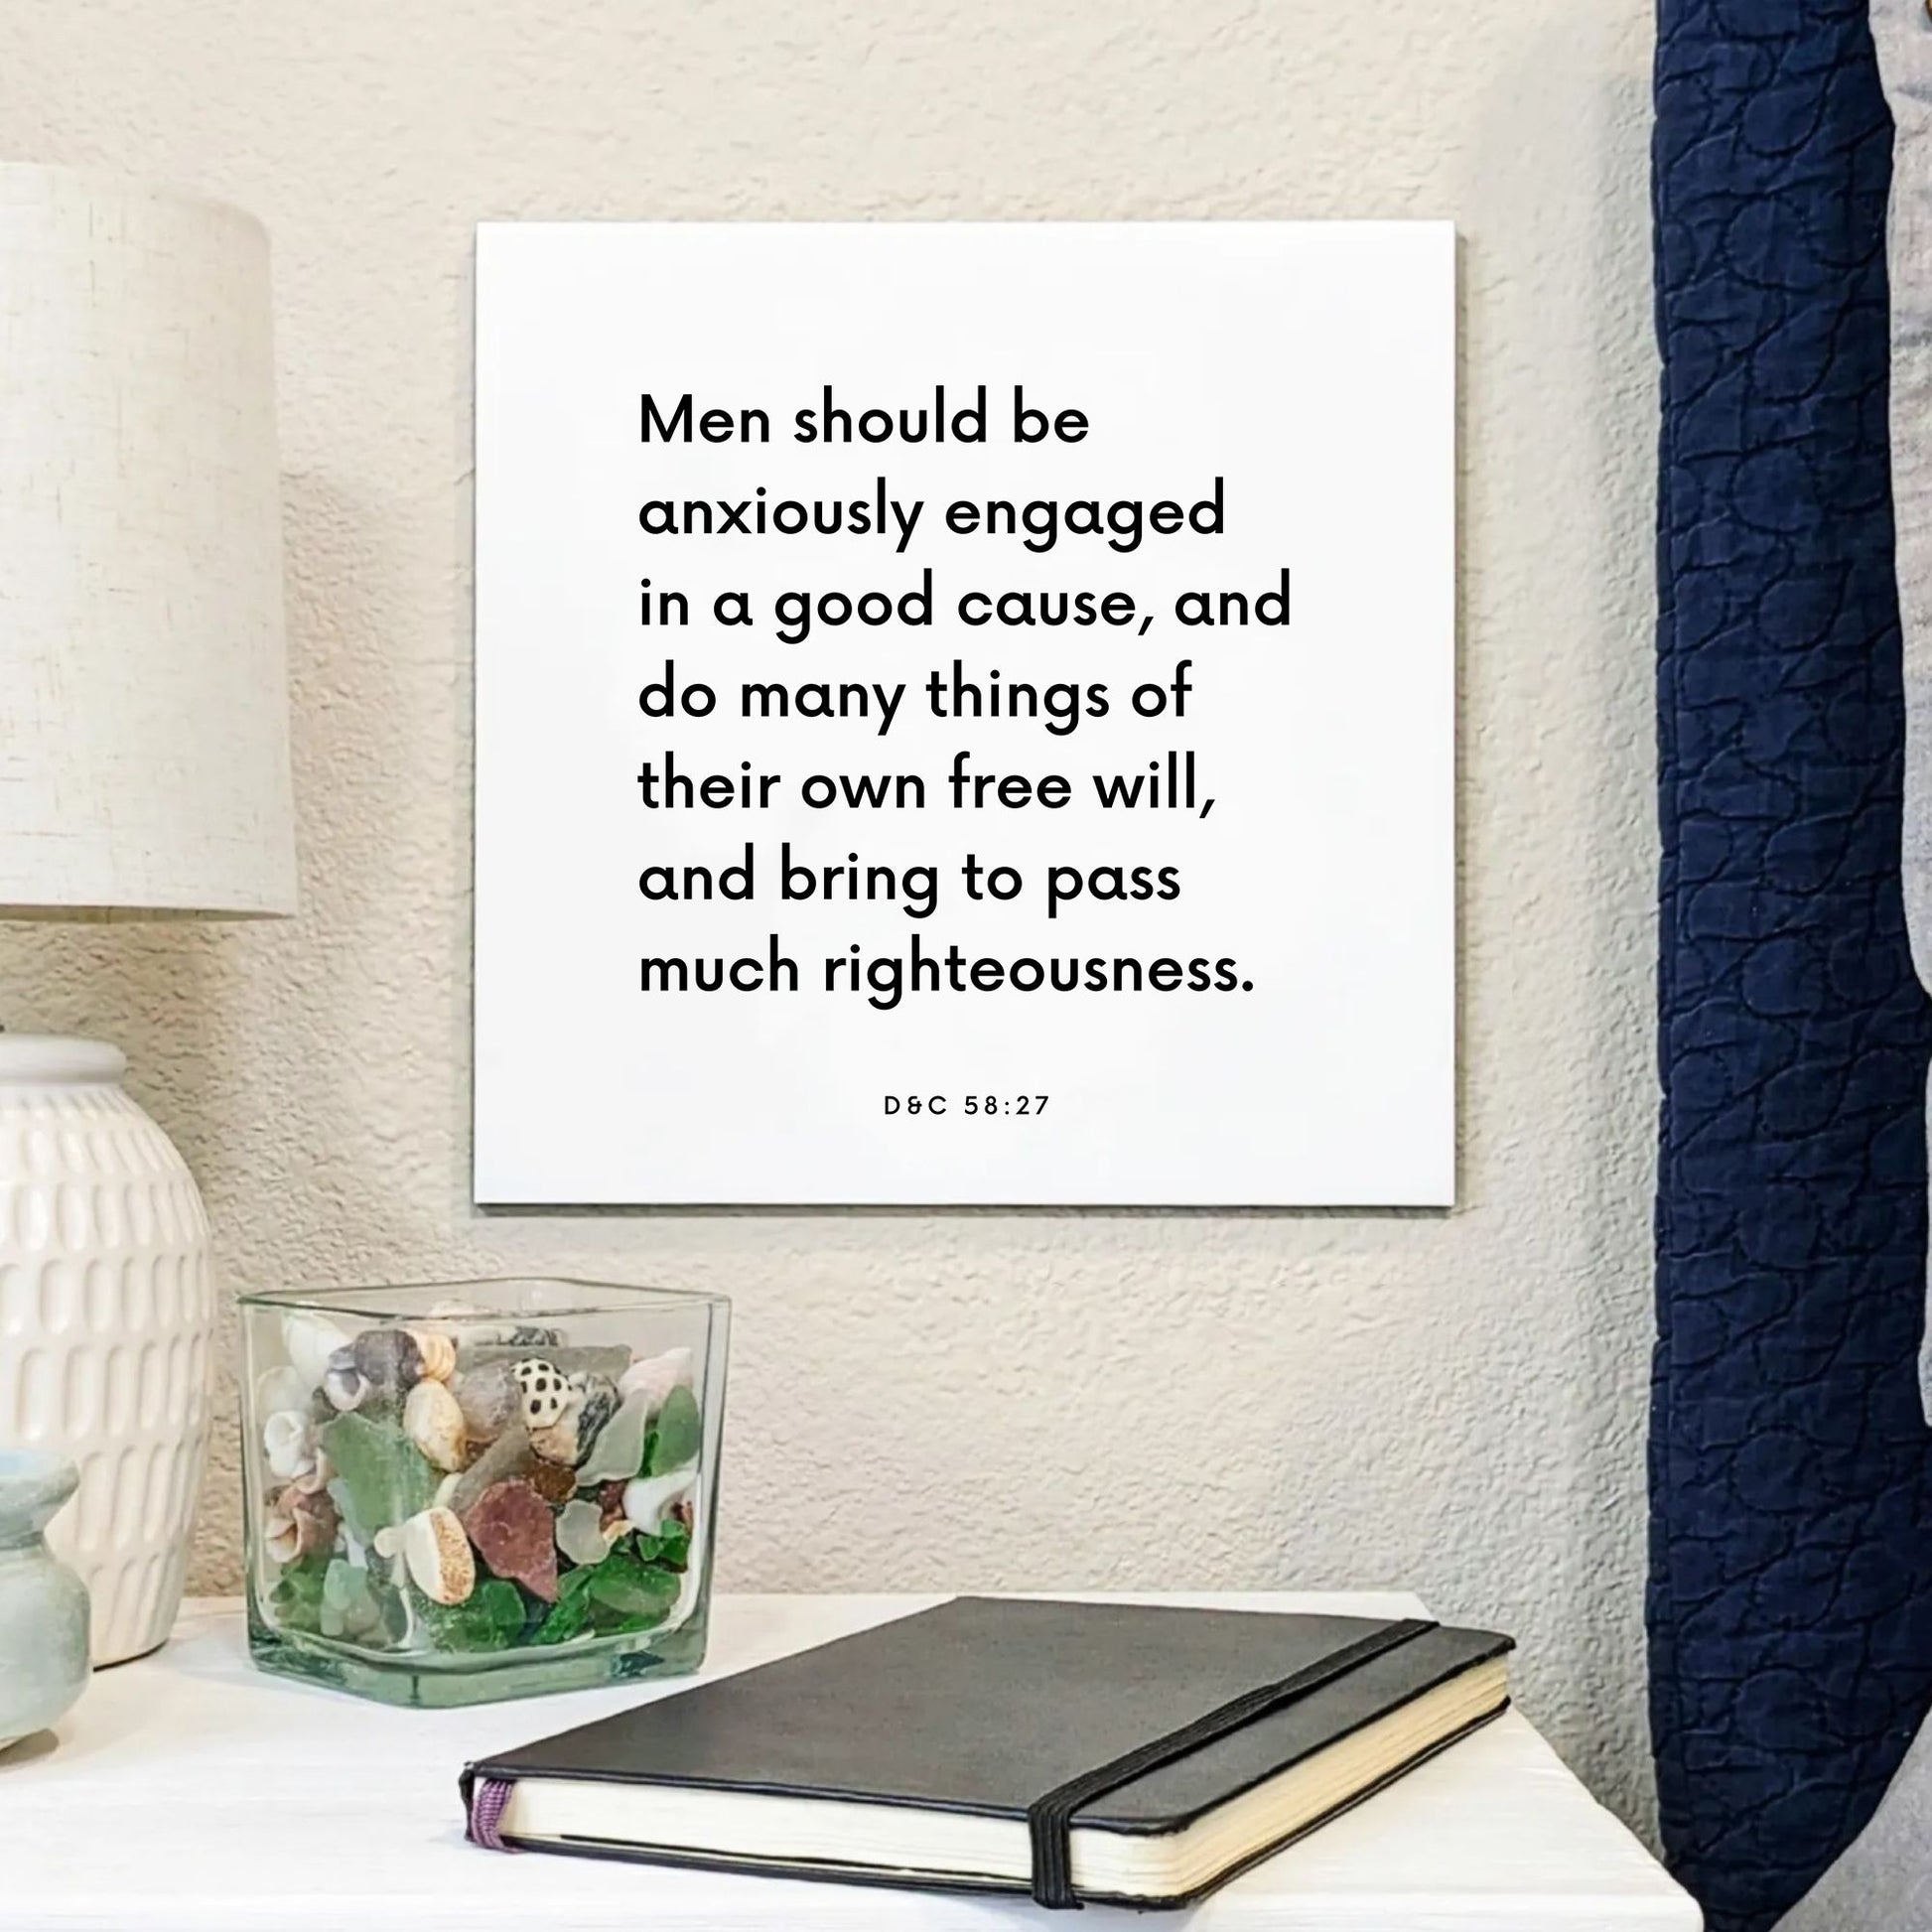 Bedside mouting of the scripture tile for D&C 58:27 - "Men should be anxiously engaged in a good cause"